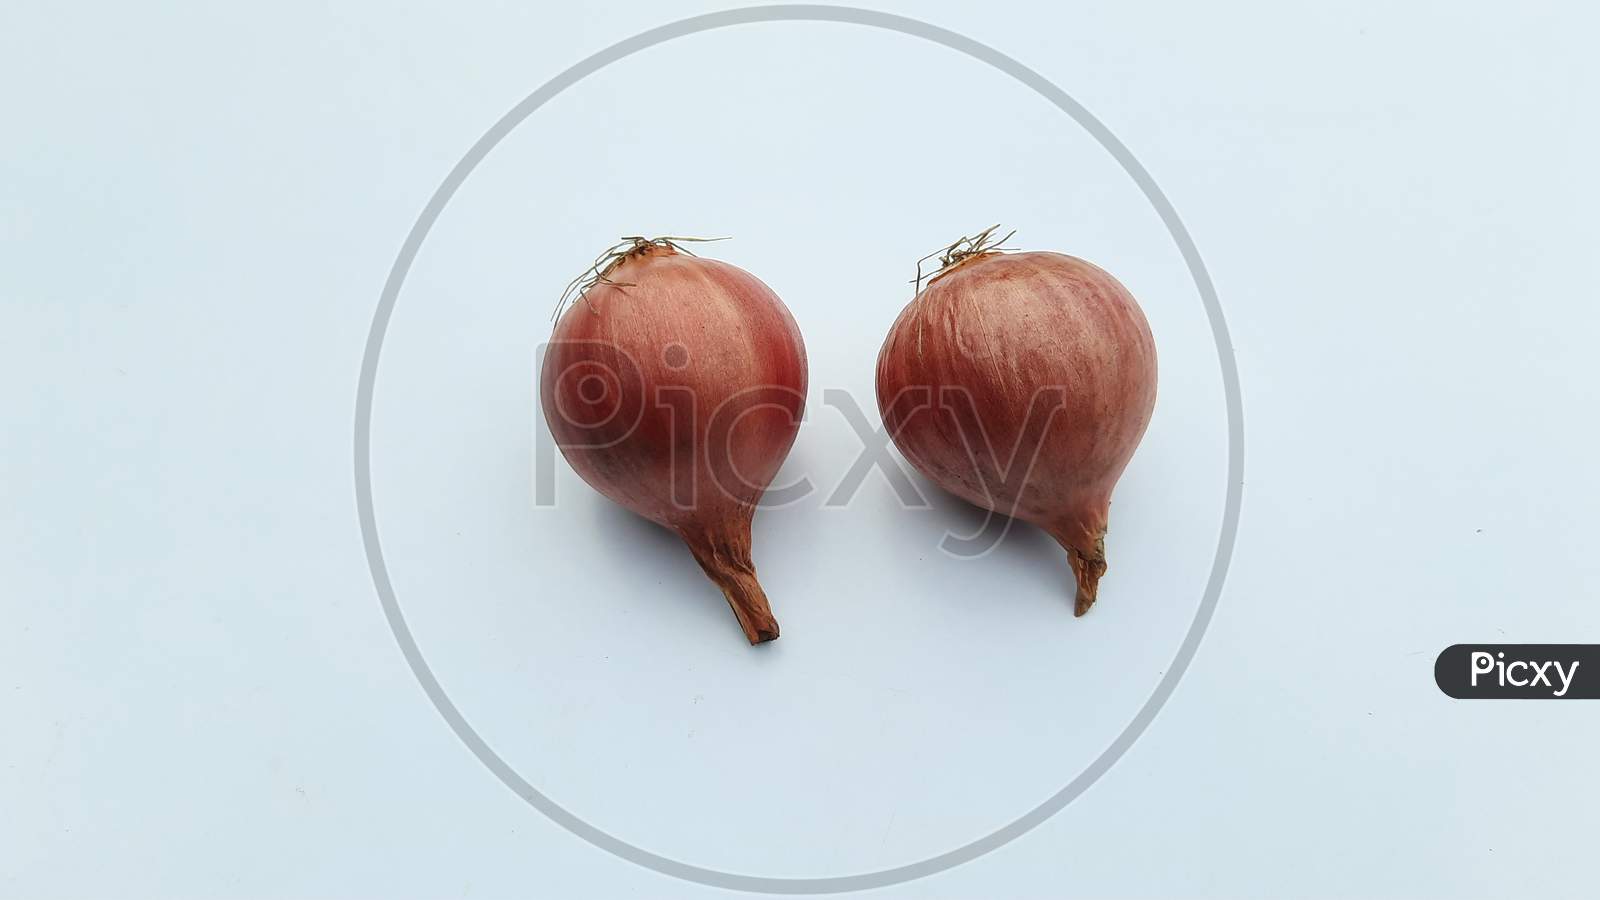 Two Onions image in white Background, Onions image,Selective Focus